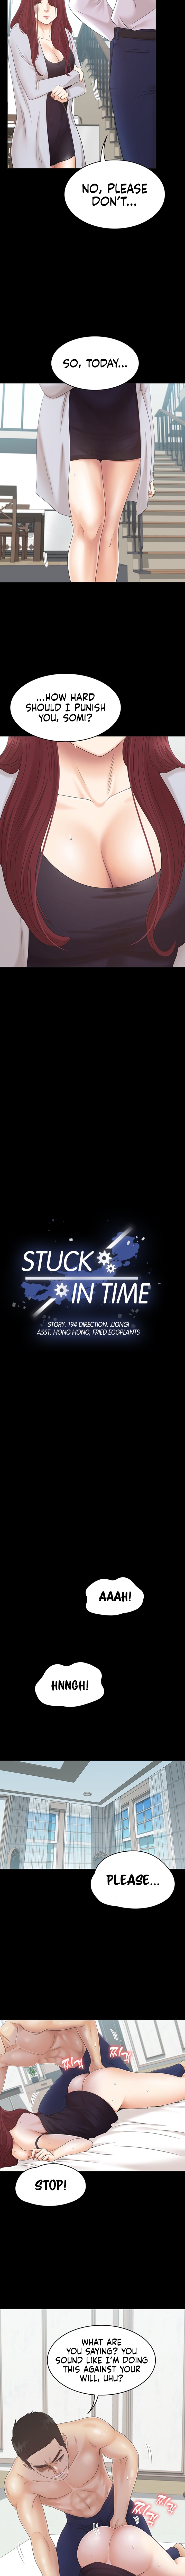 Stuck in Time NEW image